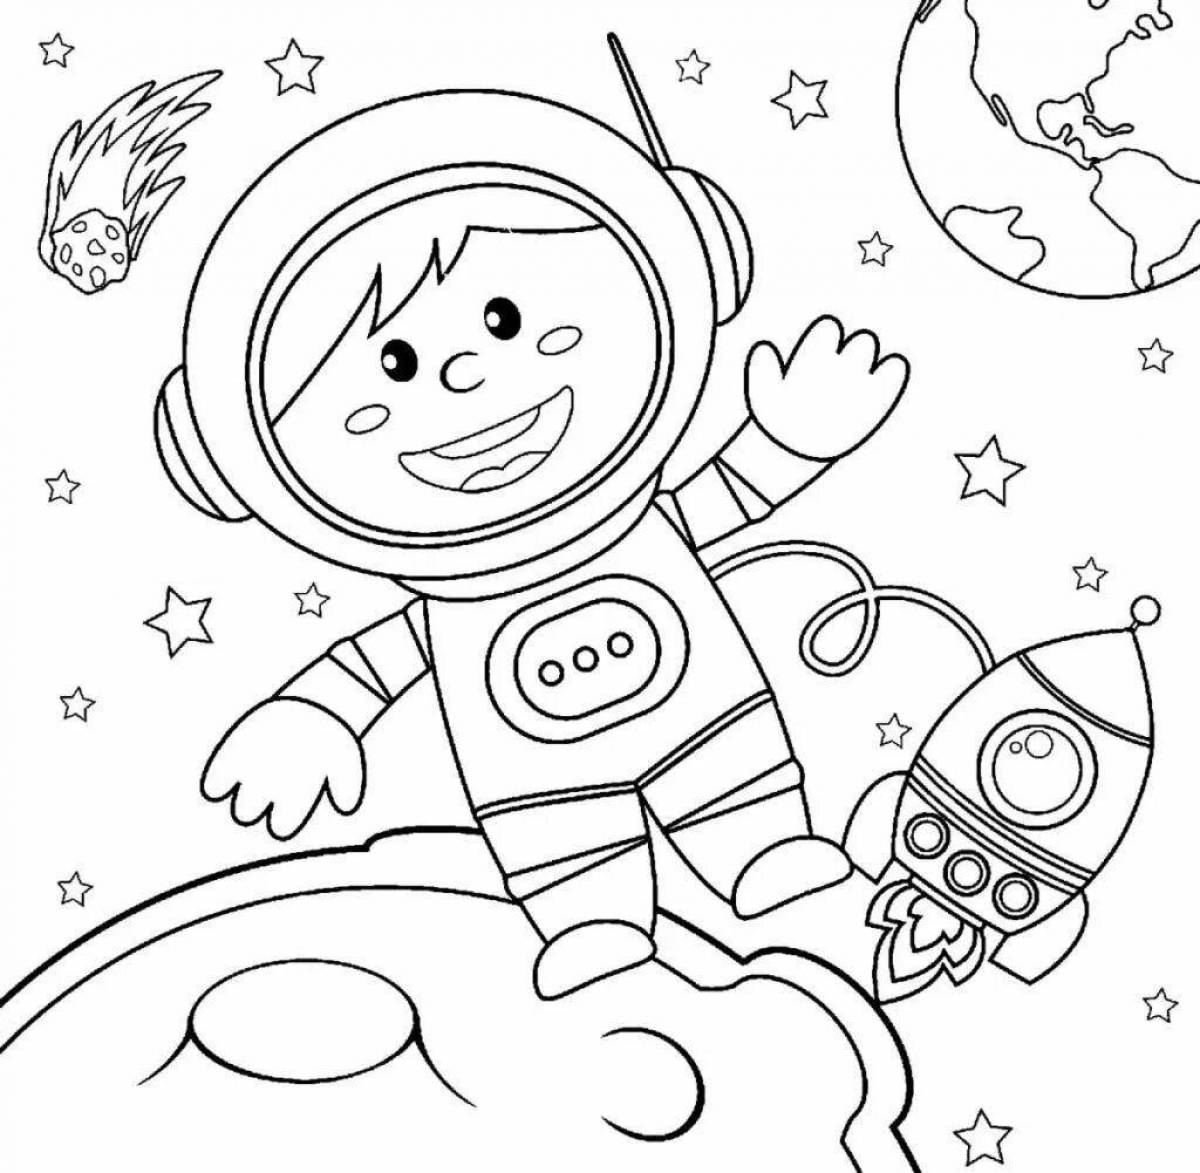 Coloring book outstanding astronaut with spaceship